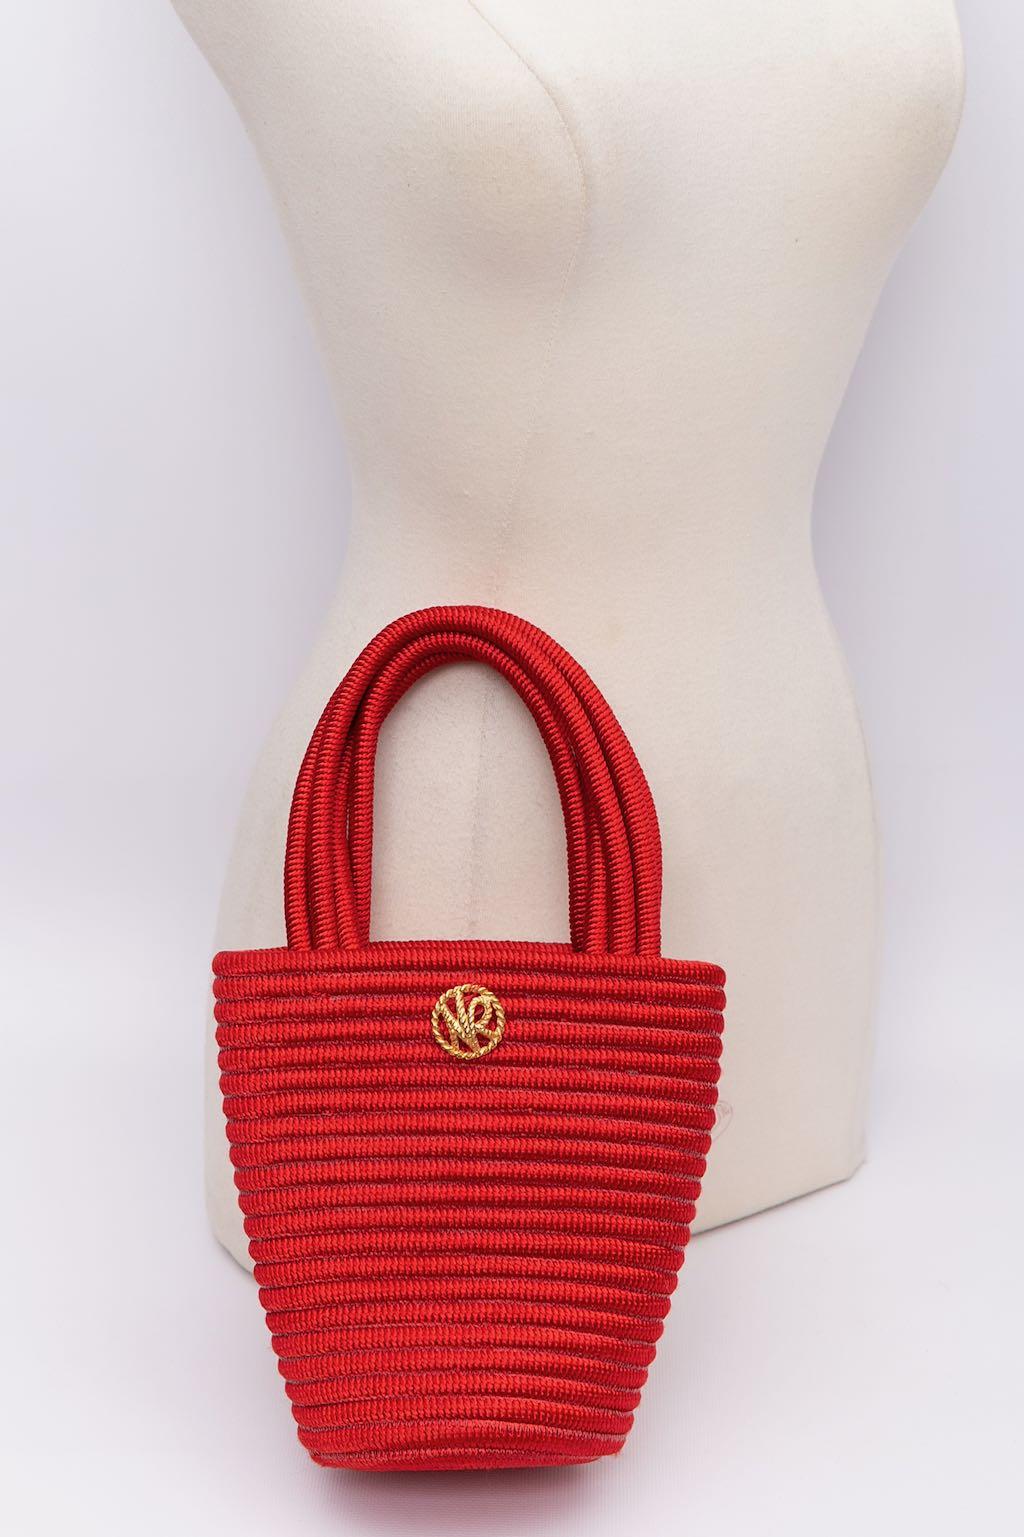 Nina Ricci Passementerie Red Bag For Sale 6